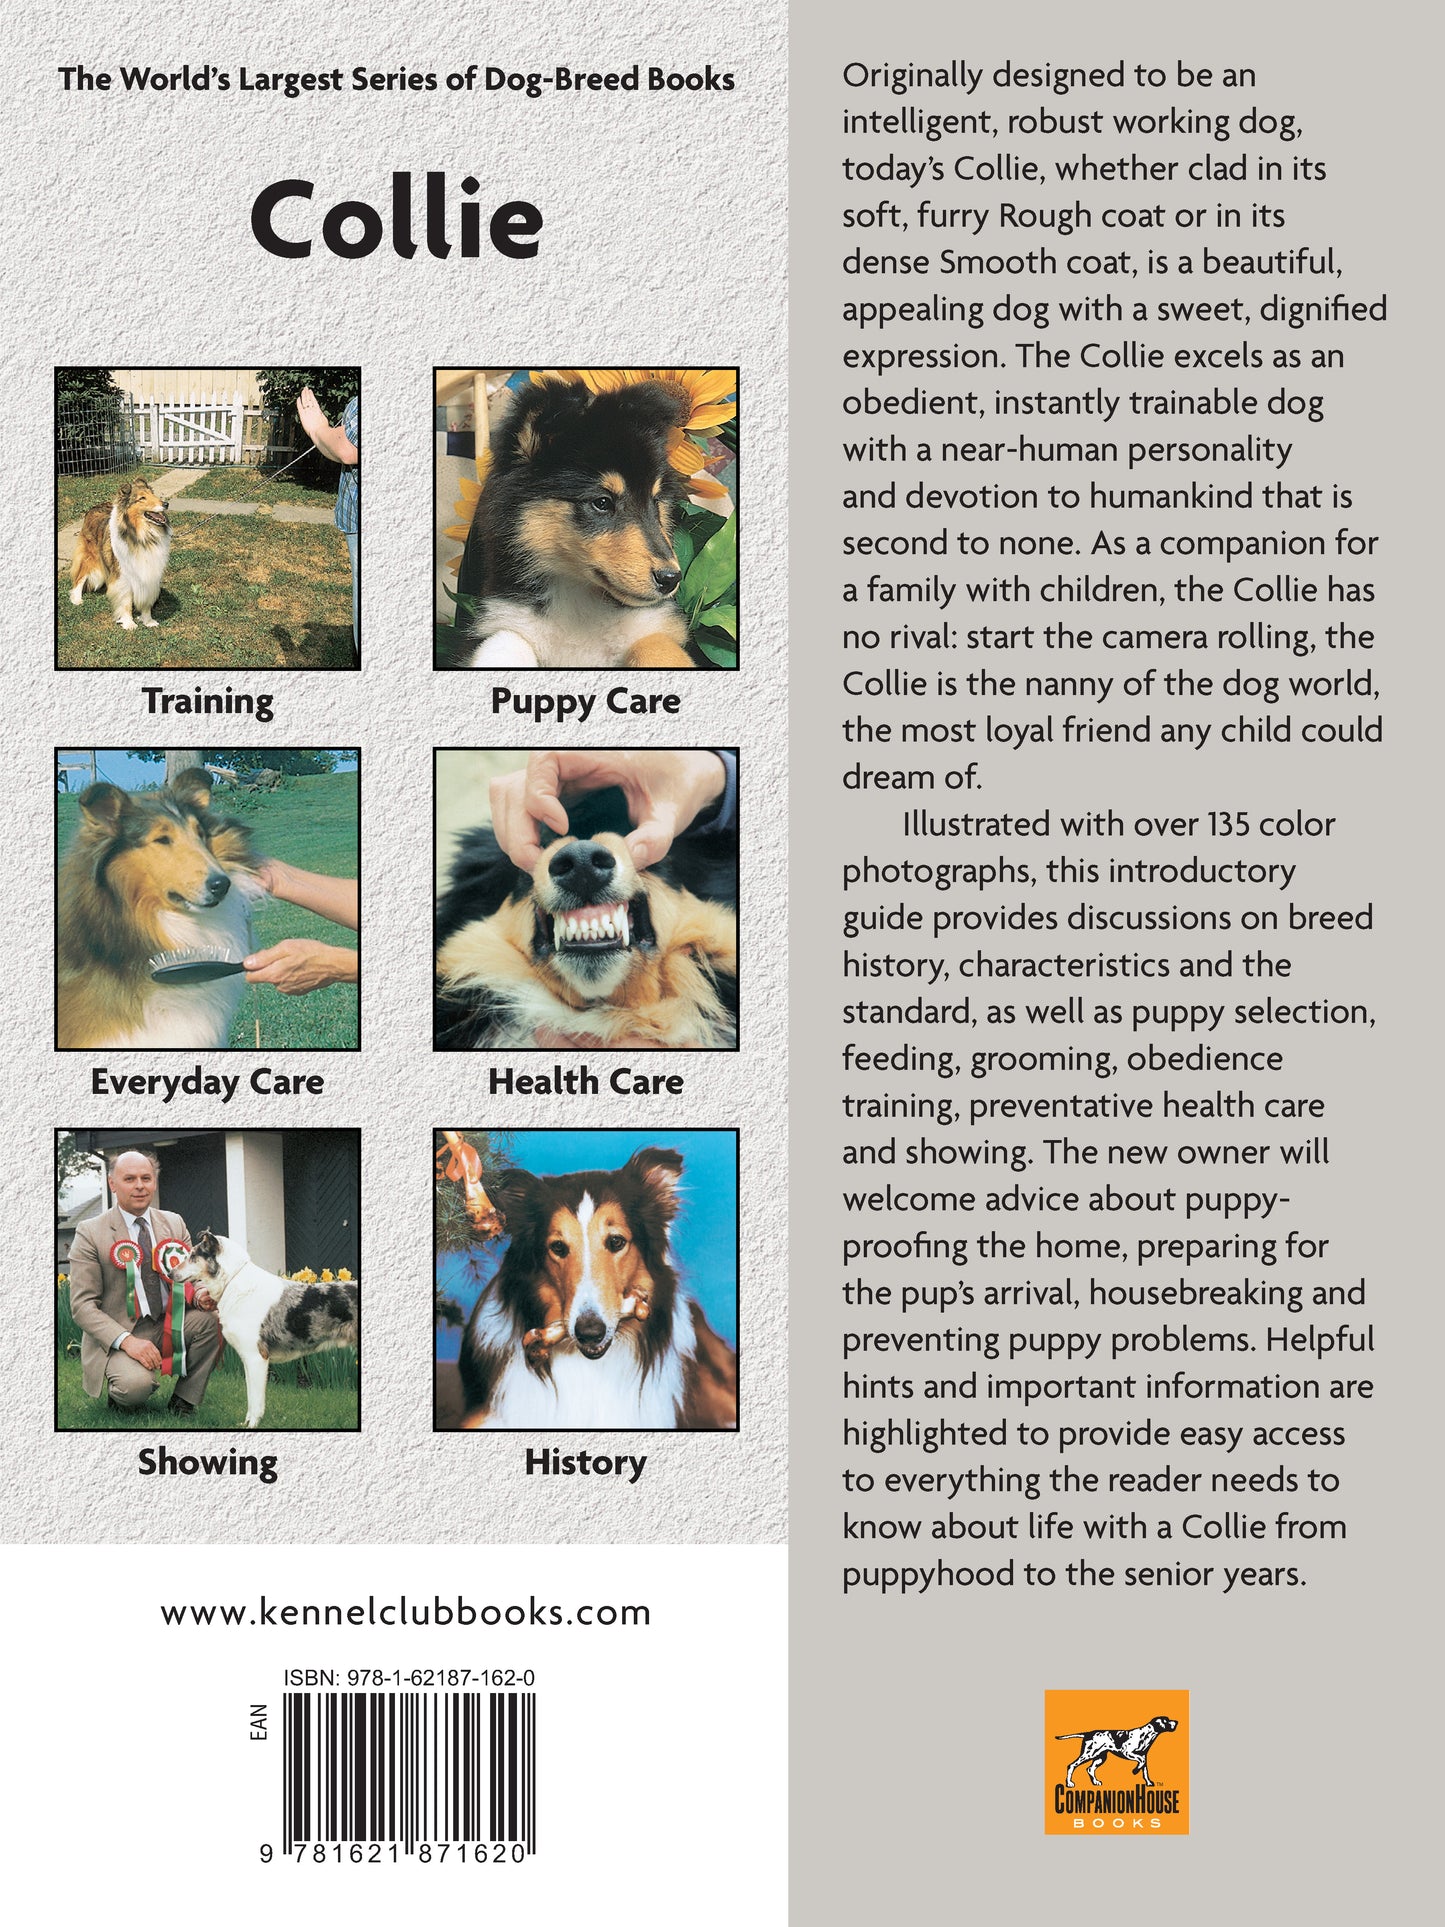 Collie (Comprehensive Owner's Guide)